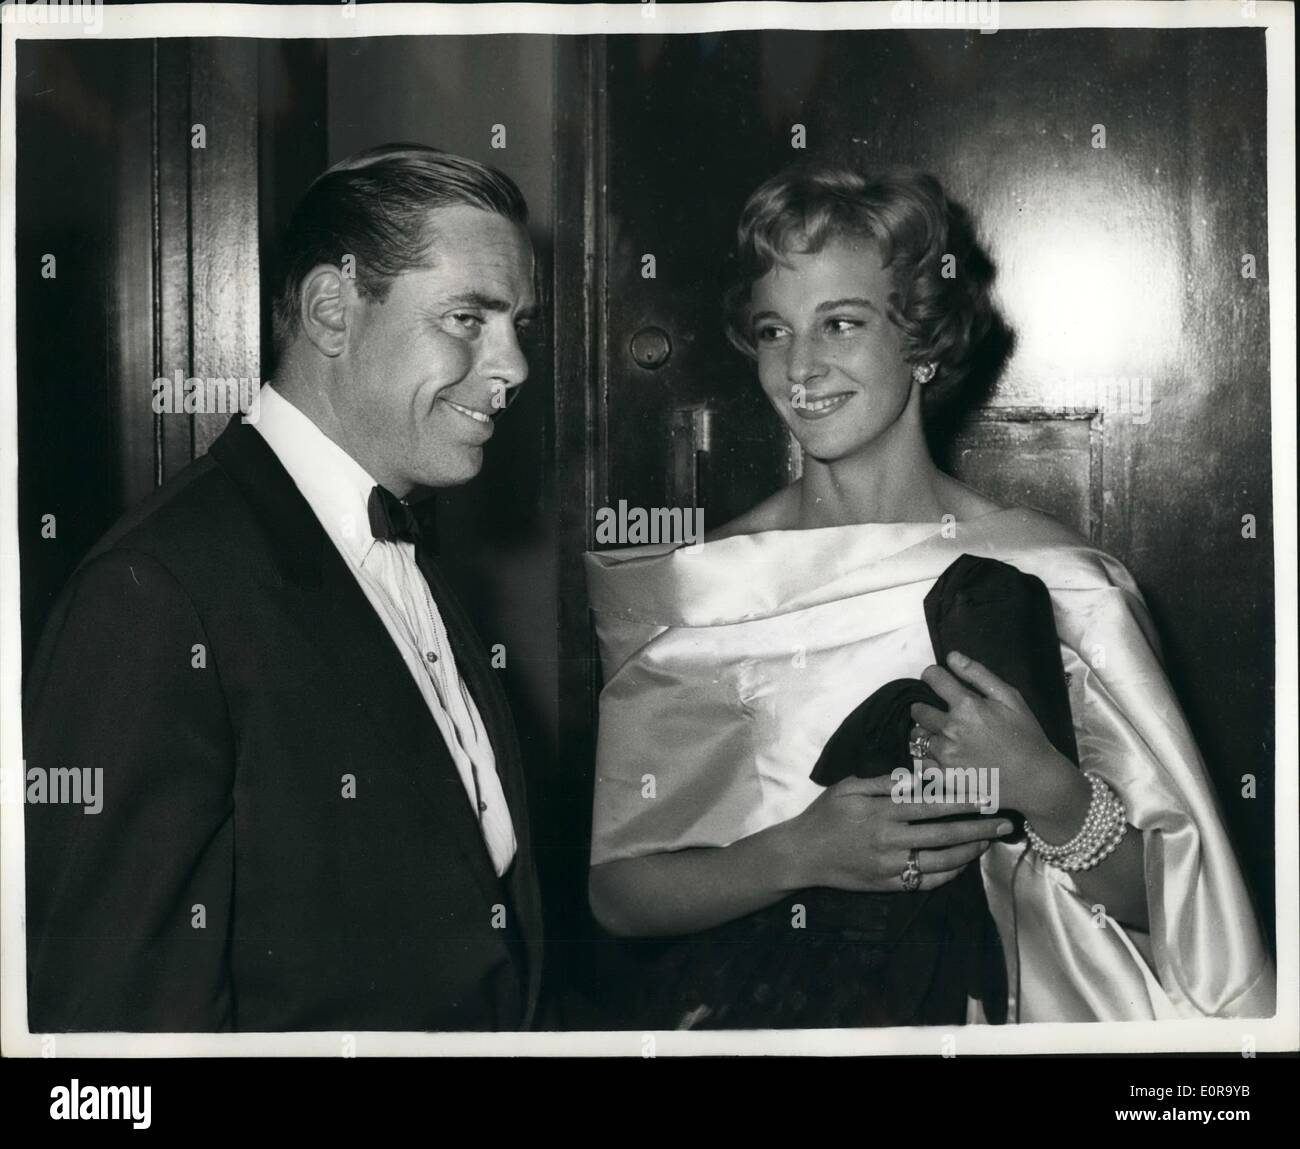 Sep. 09, 1958 - Bobo Sigrist Steps out with Hollywood's Eligible Bachelor. Heiress Bobo Sigrist who separated from her husband Gregg Juarez three months ago turned up at the first night of T.S. Eliot's ''The Elder Statesman'' at the Cambridge Theatre last night. she was on the arm of the handsome young film producer Kevin McGlory for her first night out in the WEst End since she arrived in London. Kevin said he was a very old friend of Bobo's mother, whom he had known for years Stock Photo